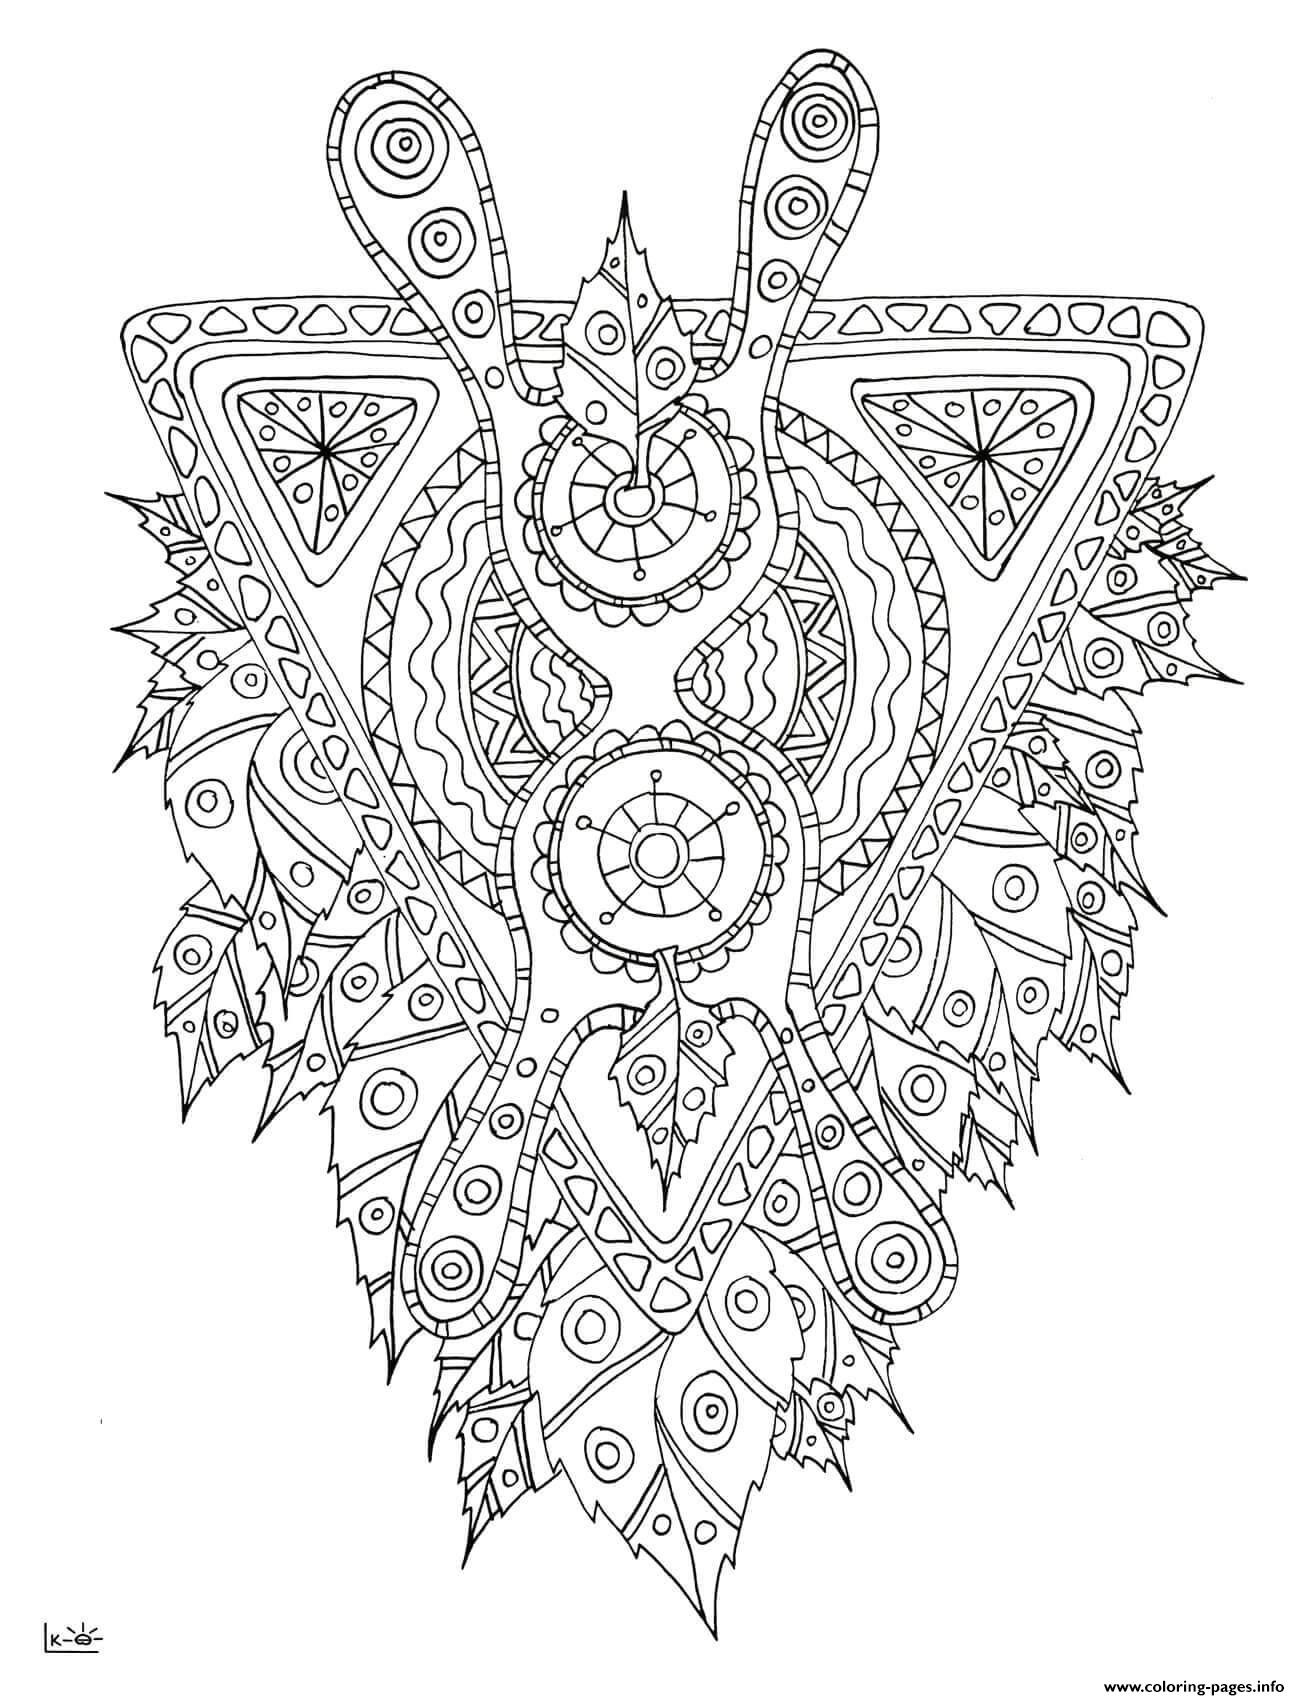 Mythical Creatures Coloring Pages For Adults
 Mythical Creature With Tribal Pattern Adults Coloring